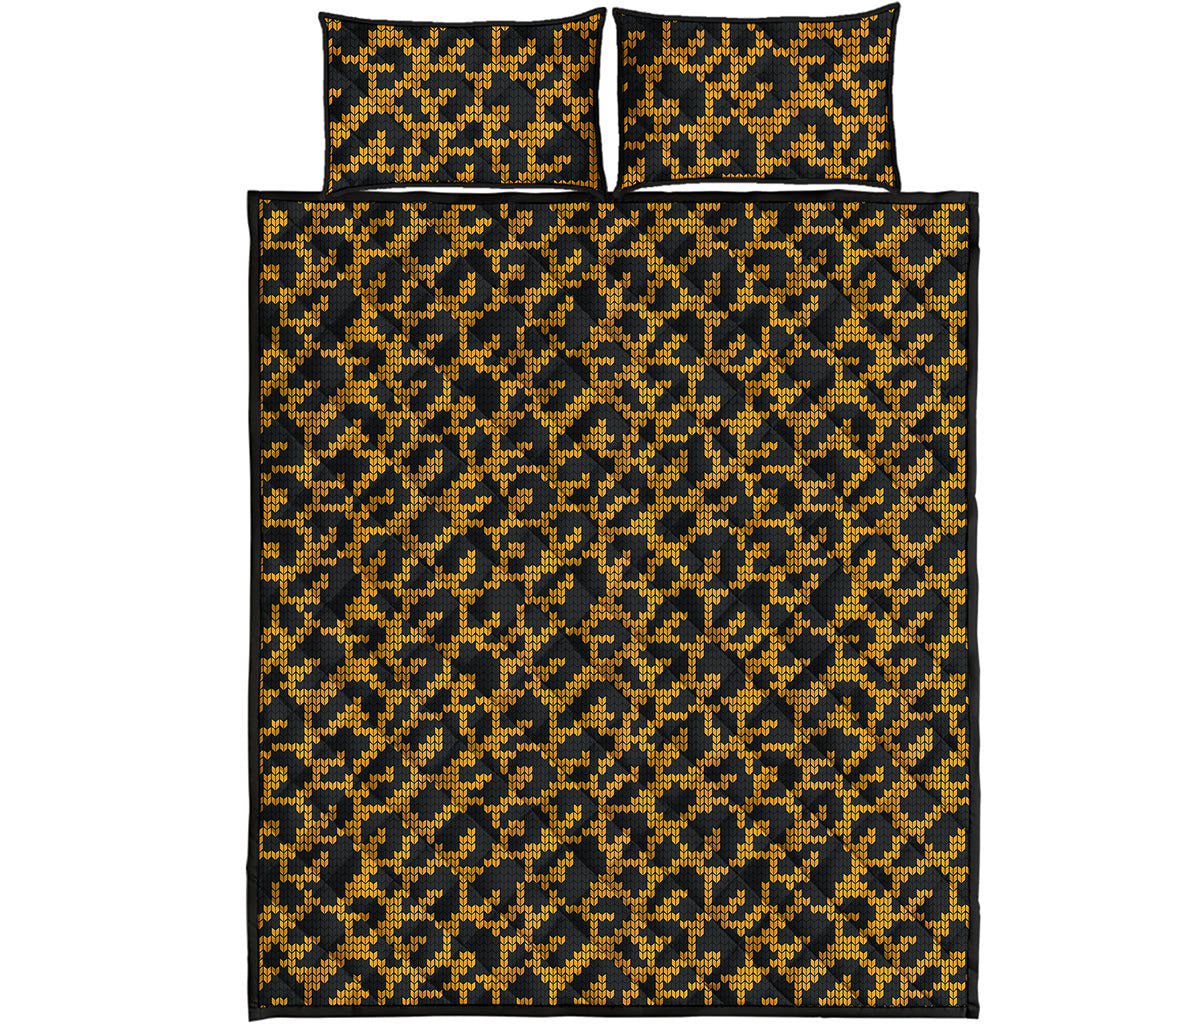 Wild Leopard Knitted Pattern Print Quilt Bed Set